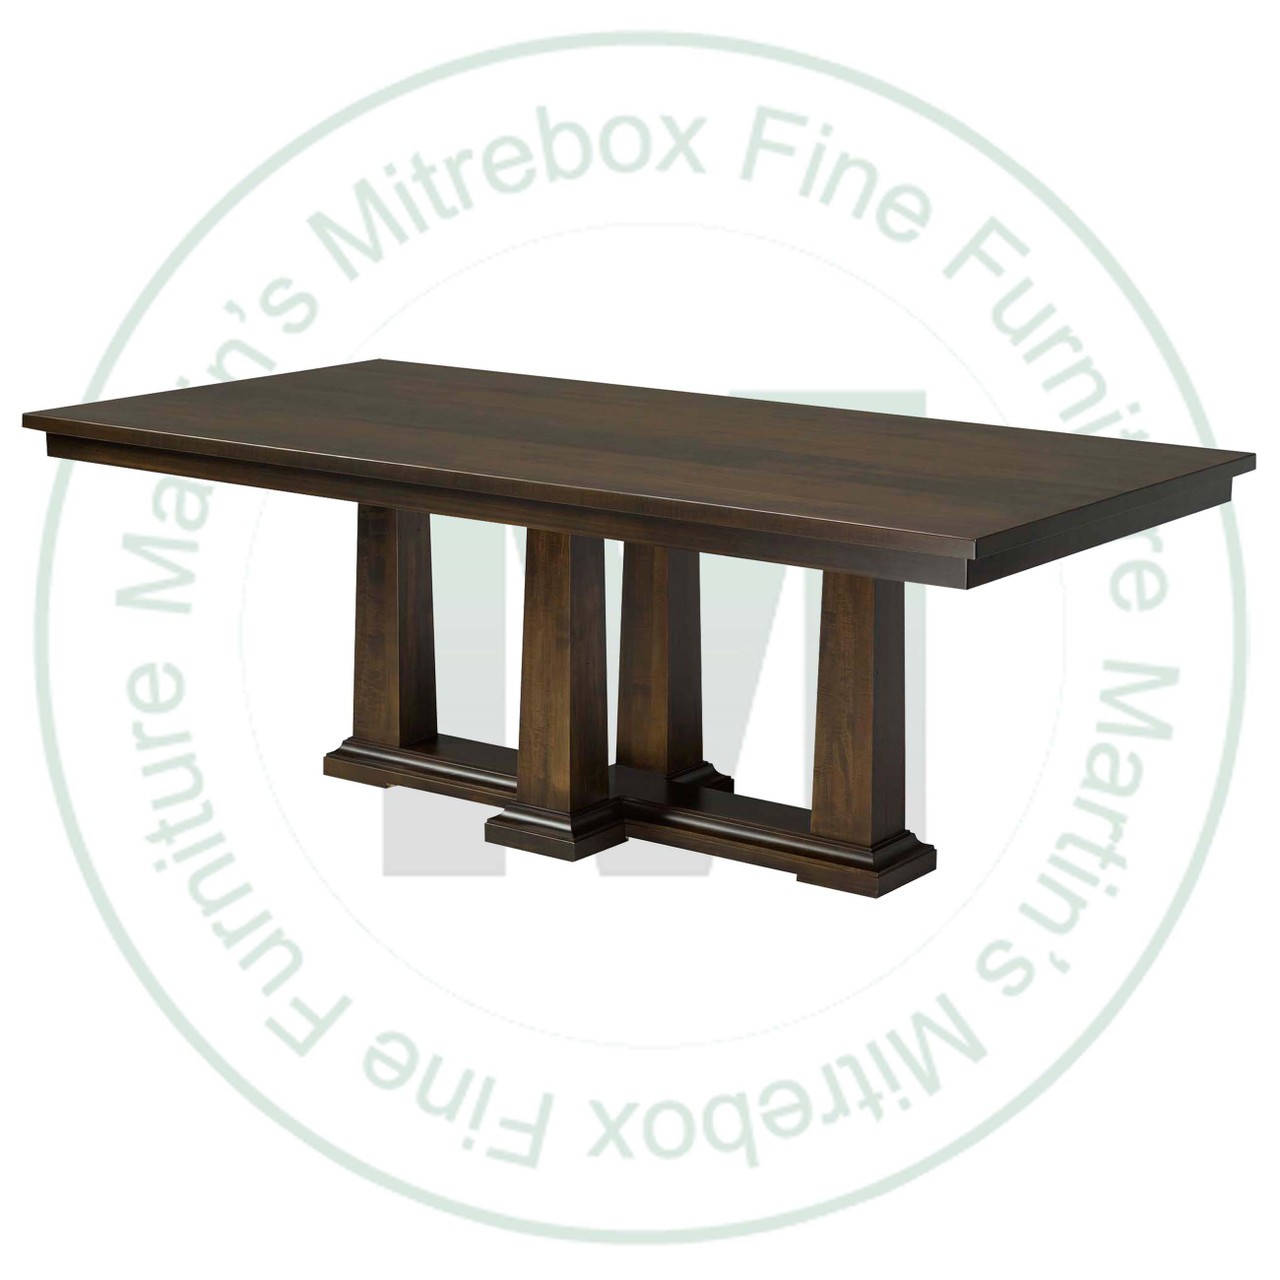 Maple Parthenon Double Pedestal Table 54''D x 96''W x 30''H Solid Top Table Has 1.25'' Thick Top